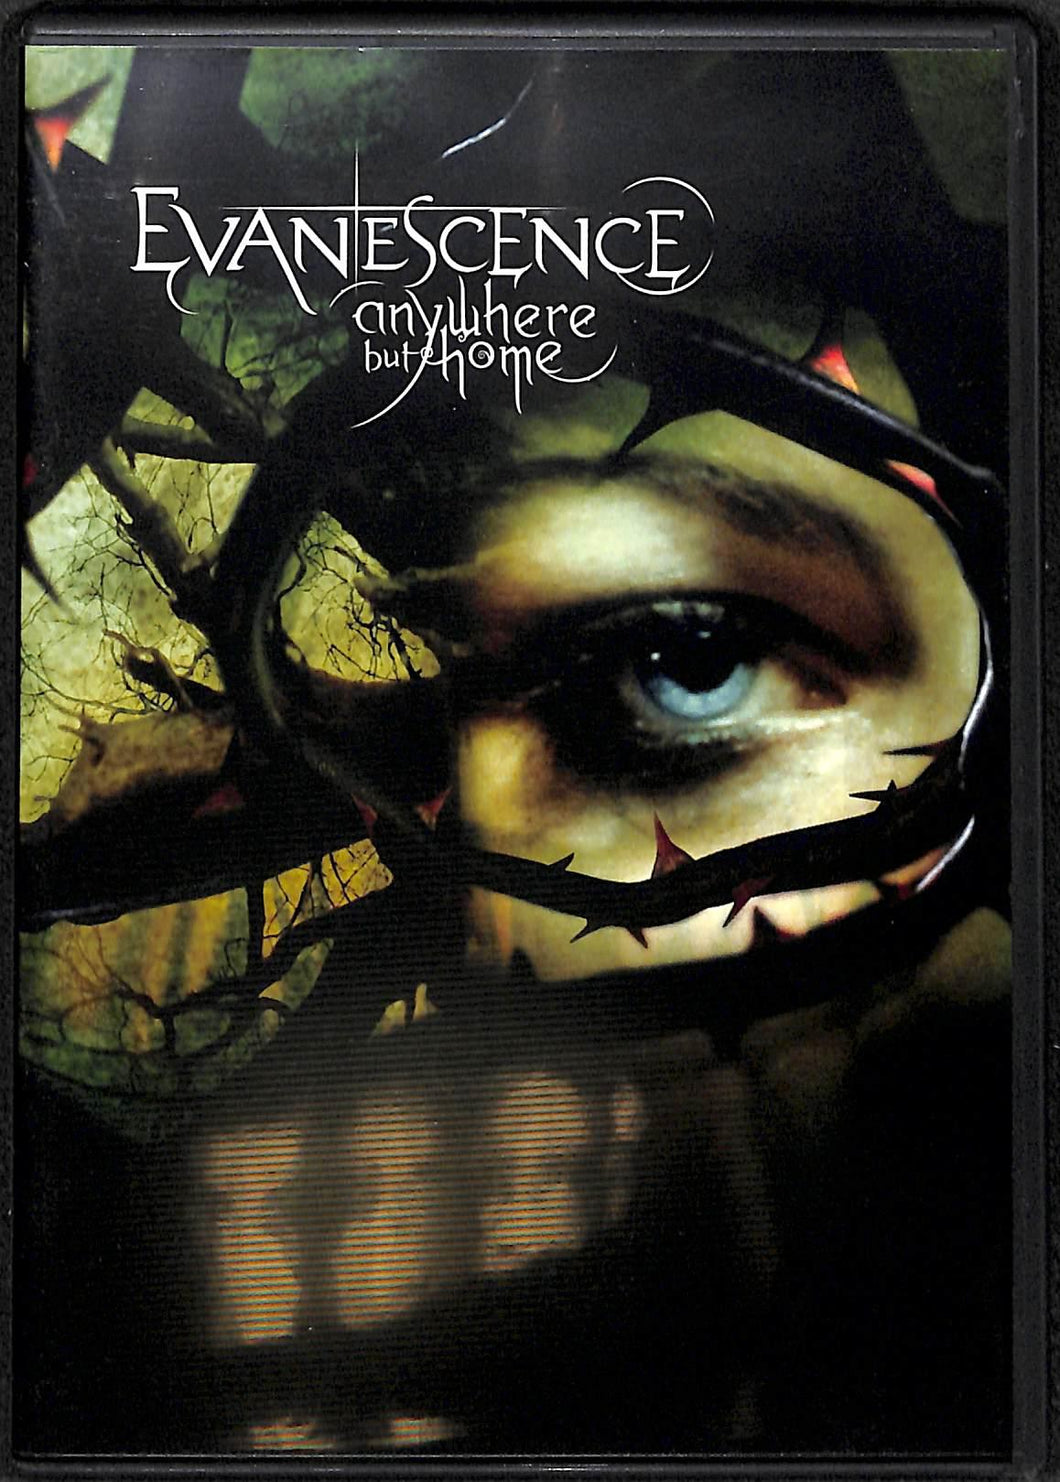 Dvd - Evanescence - Anywhere But Home